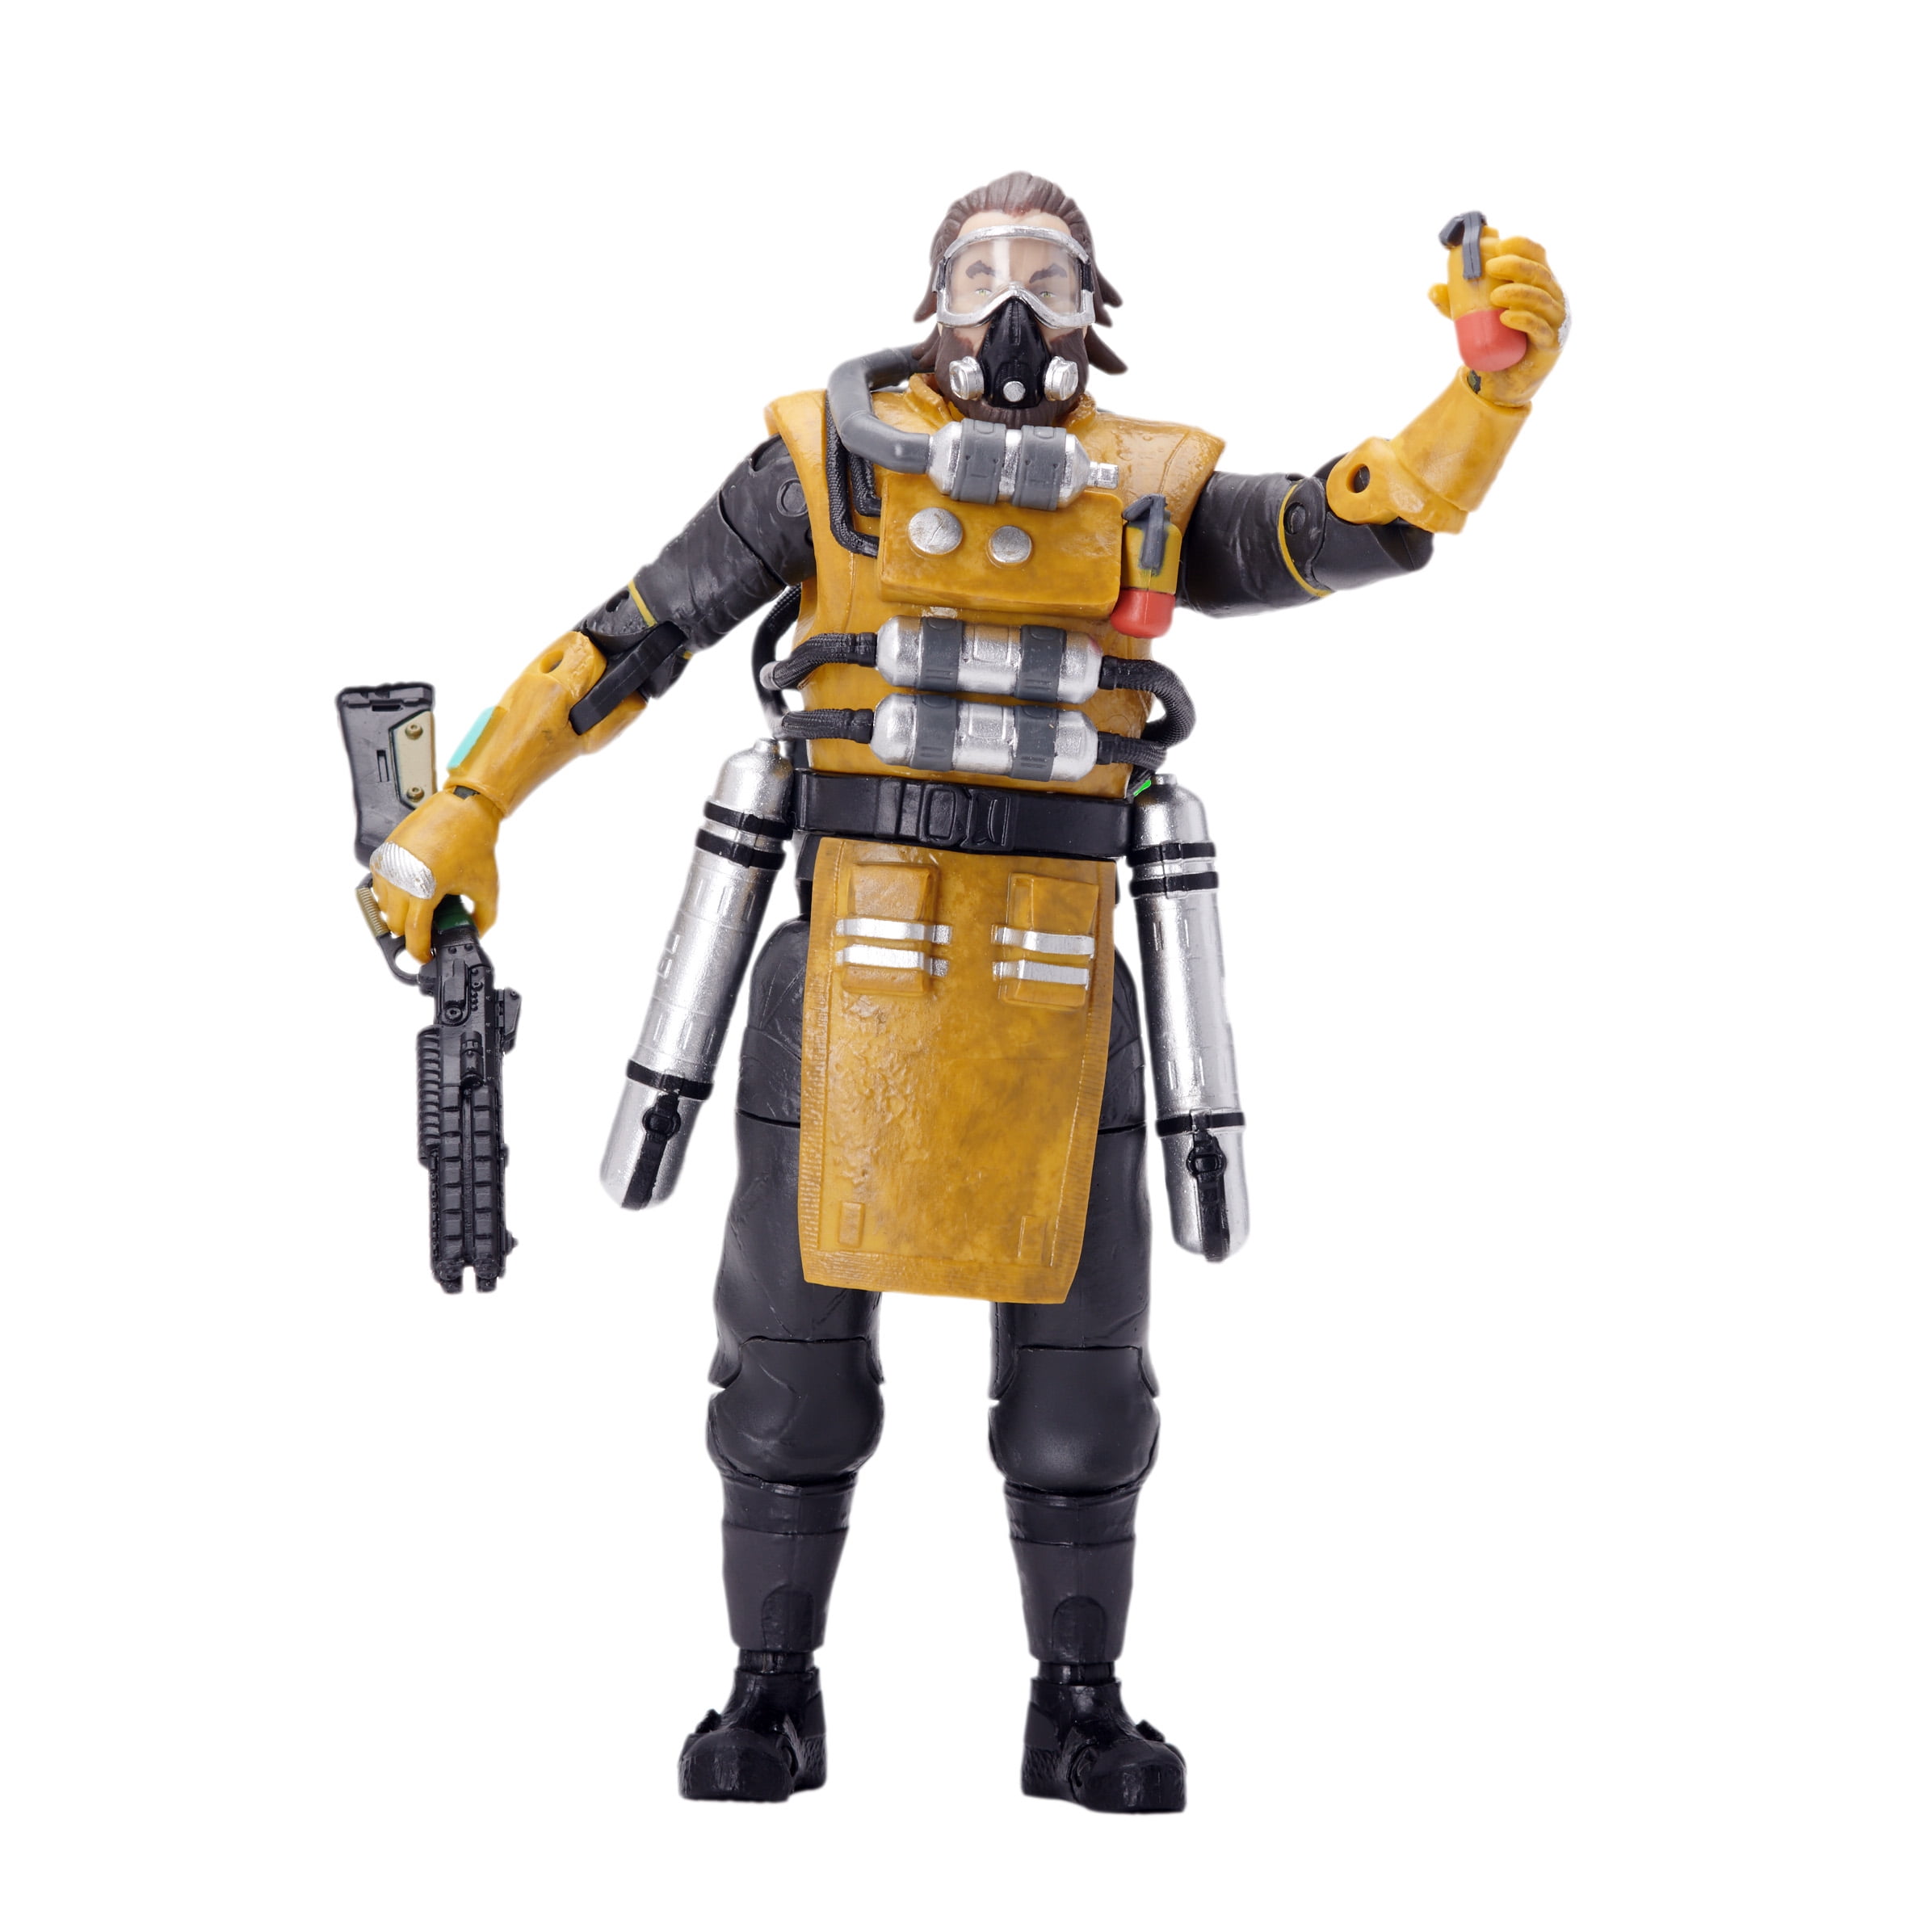 Team Lift Skin apex legends Action Figure 6-Inch Pathfinder Collectible Rare 